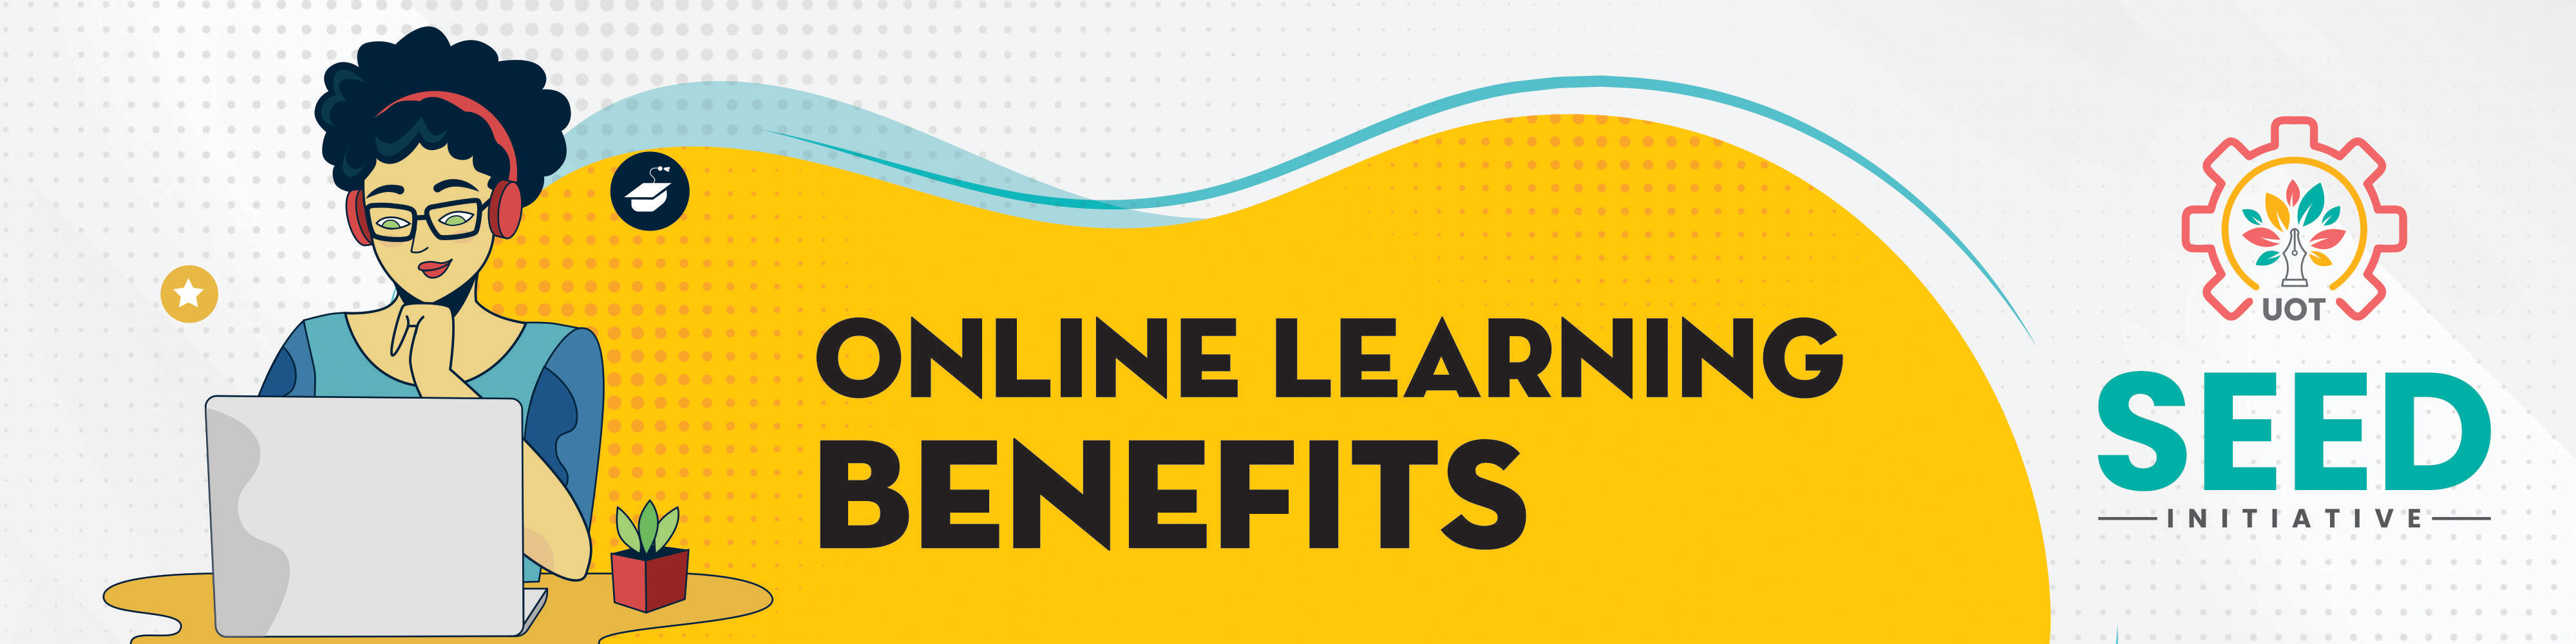 Online Learning Benefits 